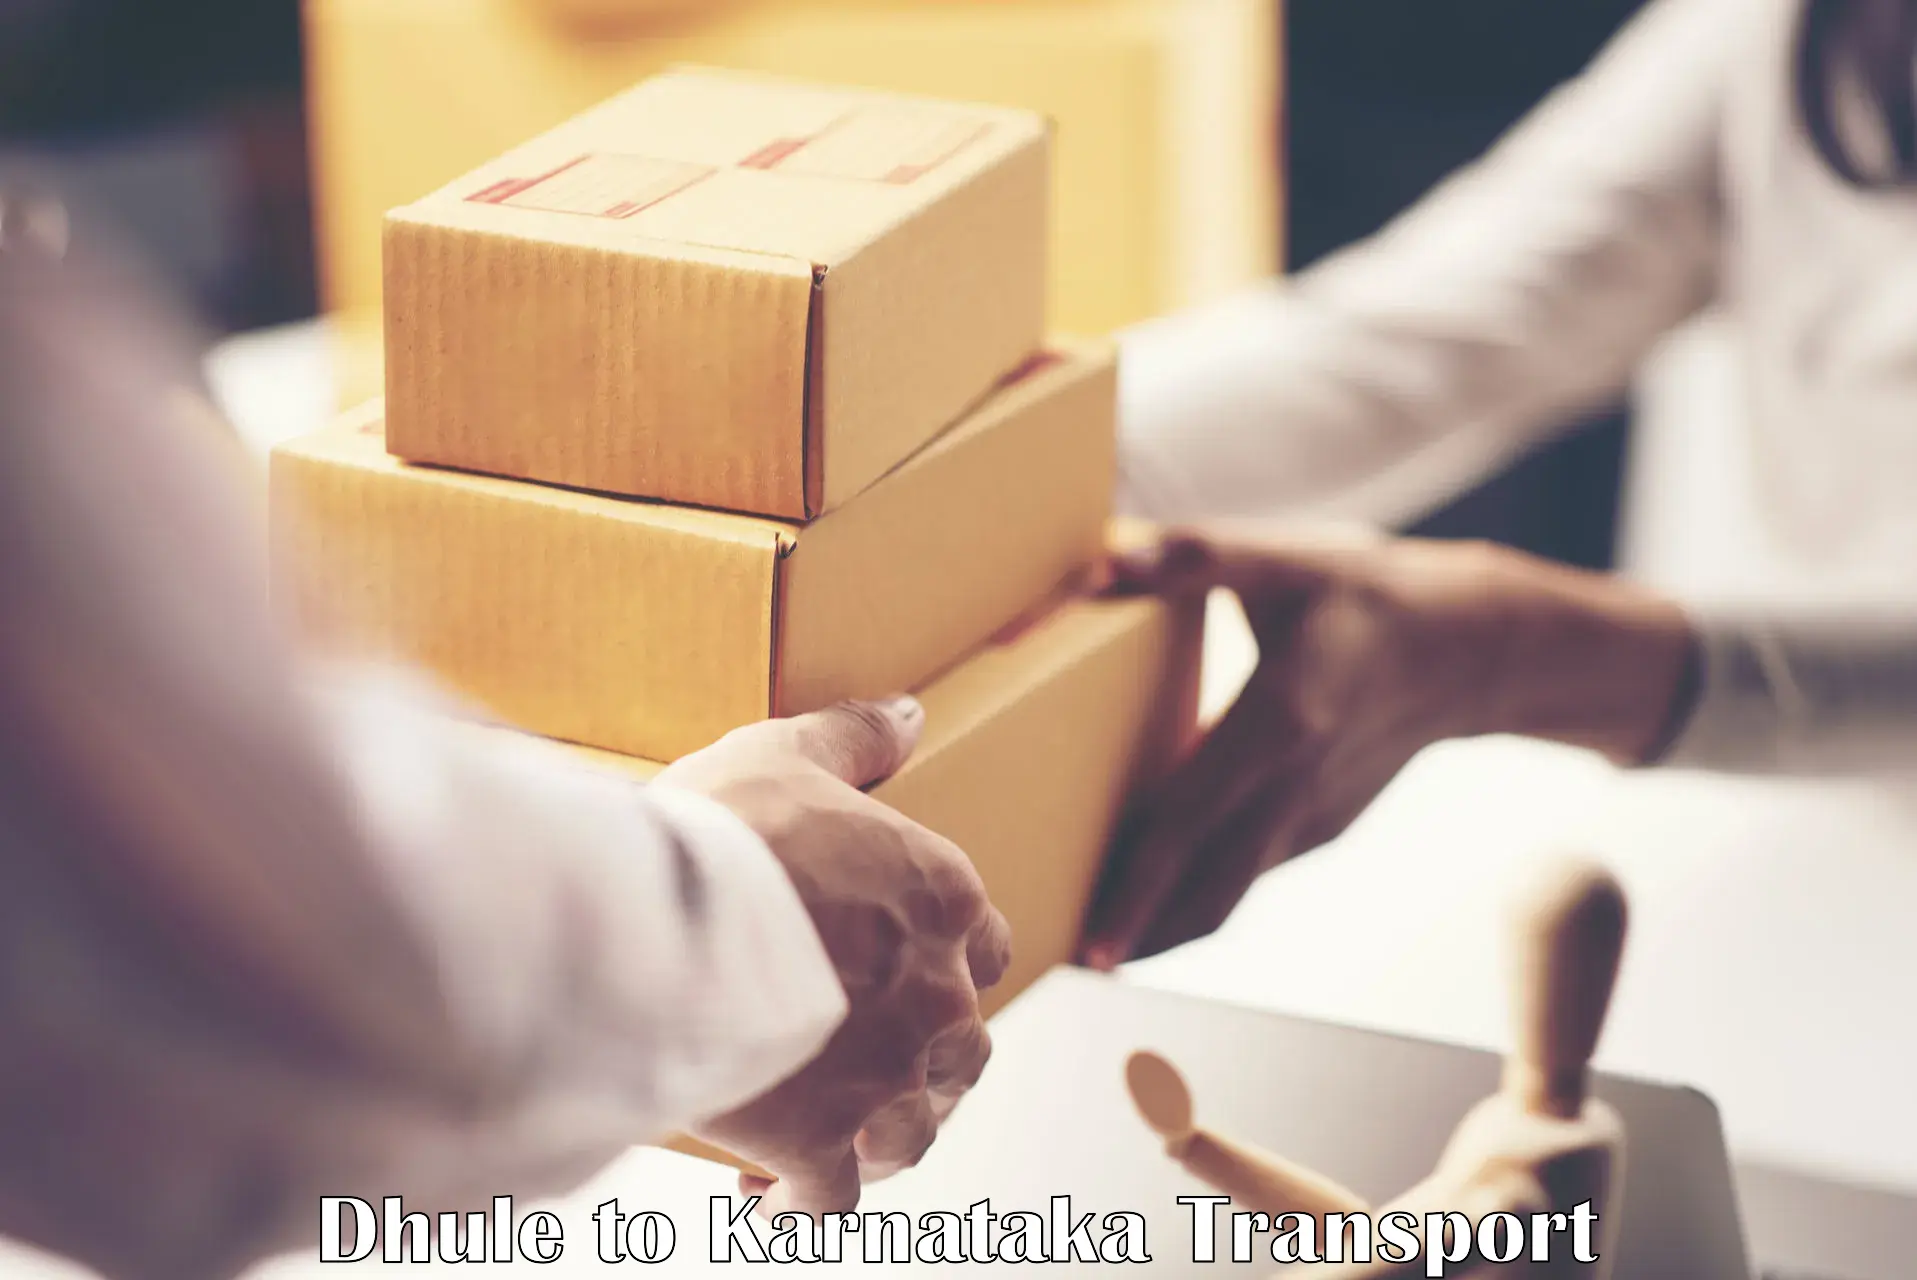 Air freight transport services Dhule to Bantwal